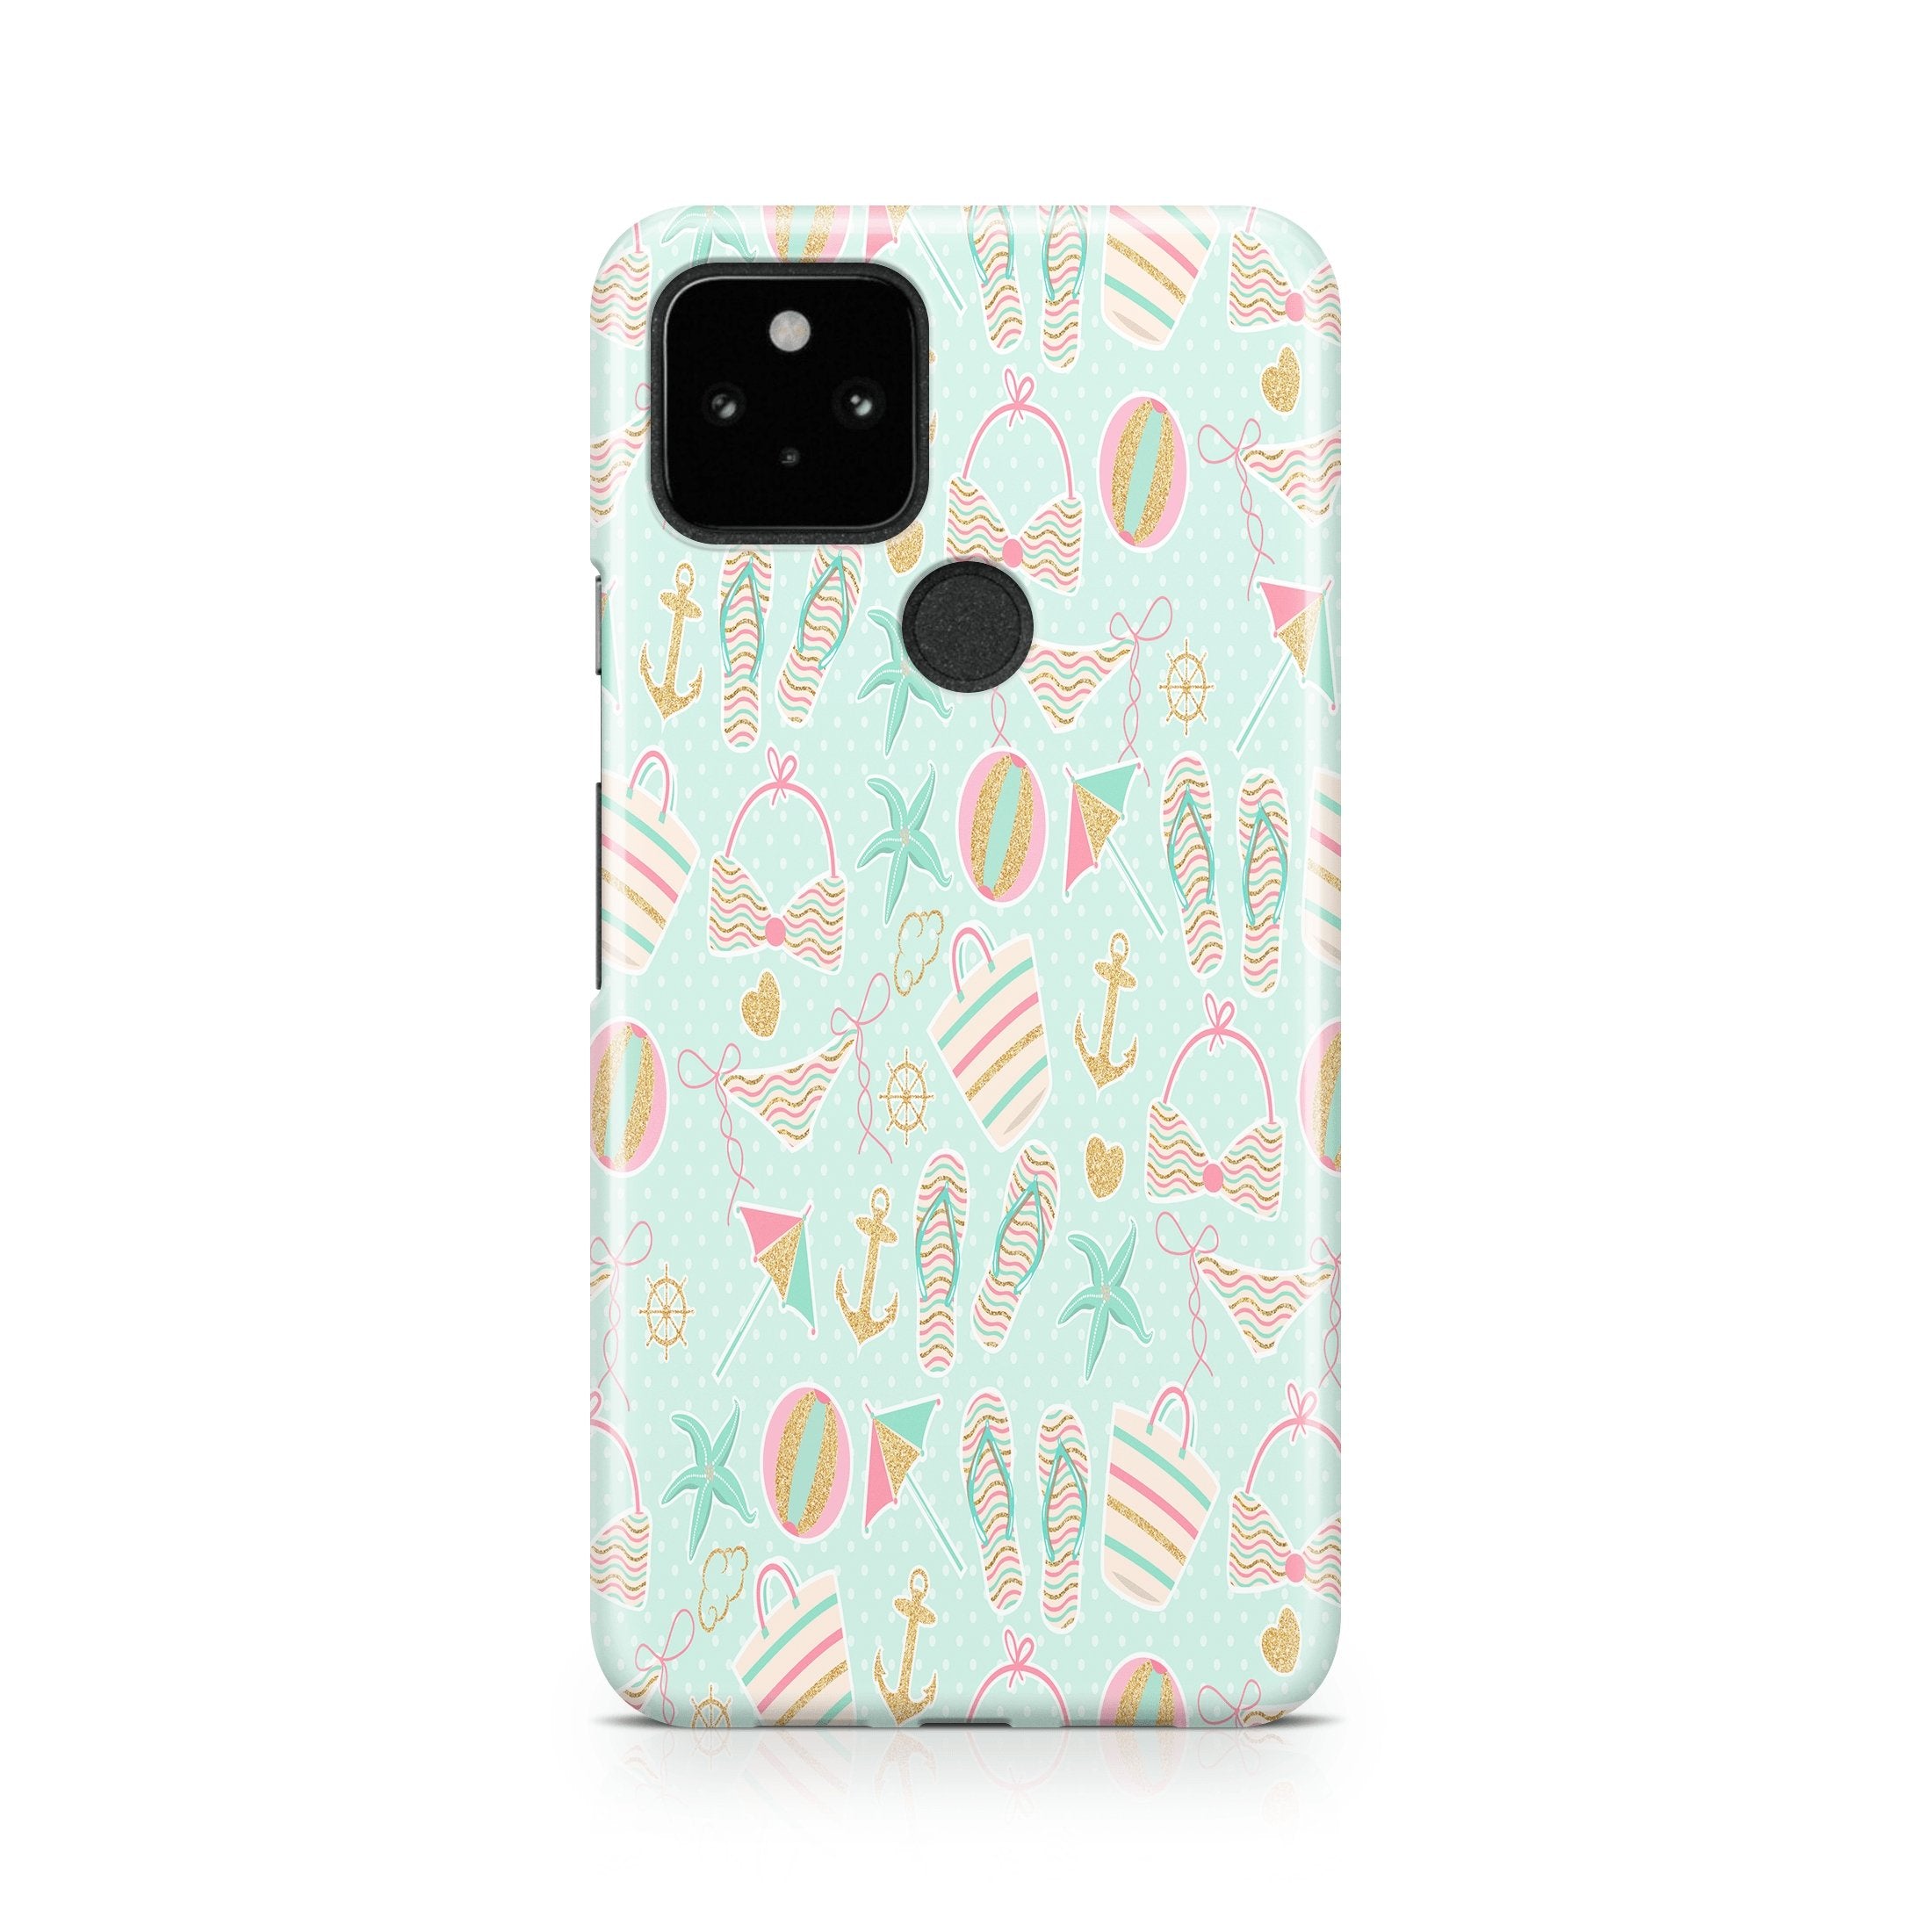 Beach Baby - Google phone case designs by CaseSwagger